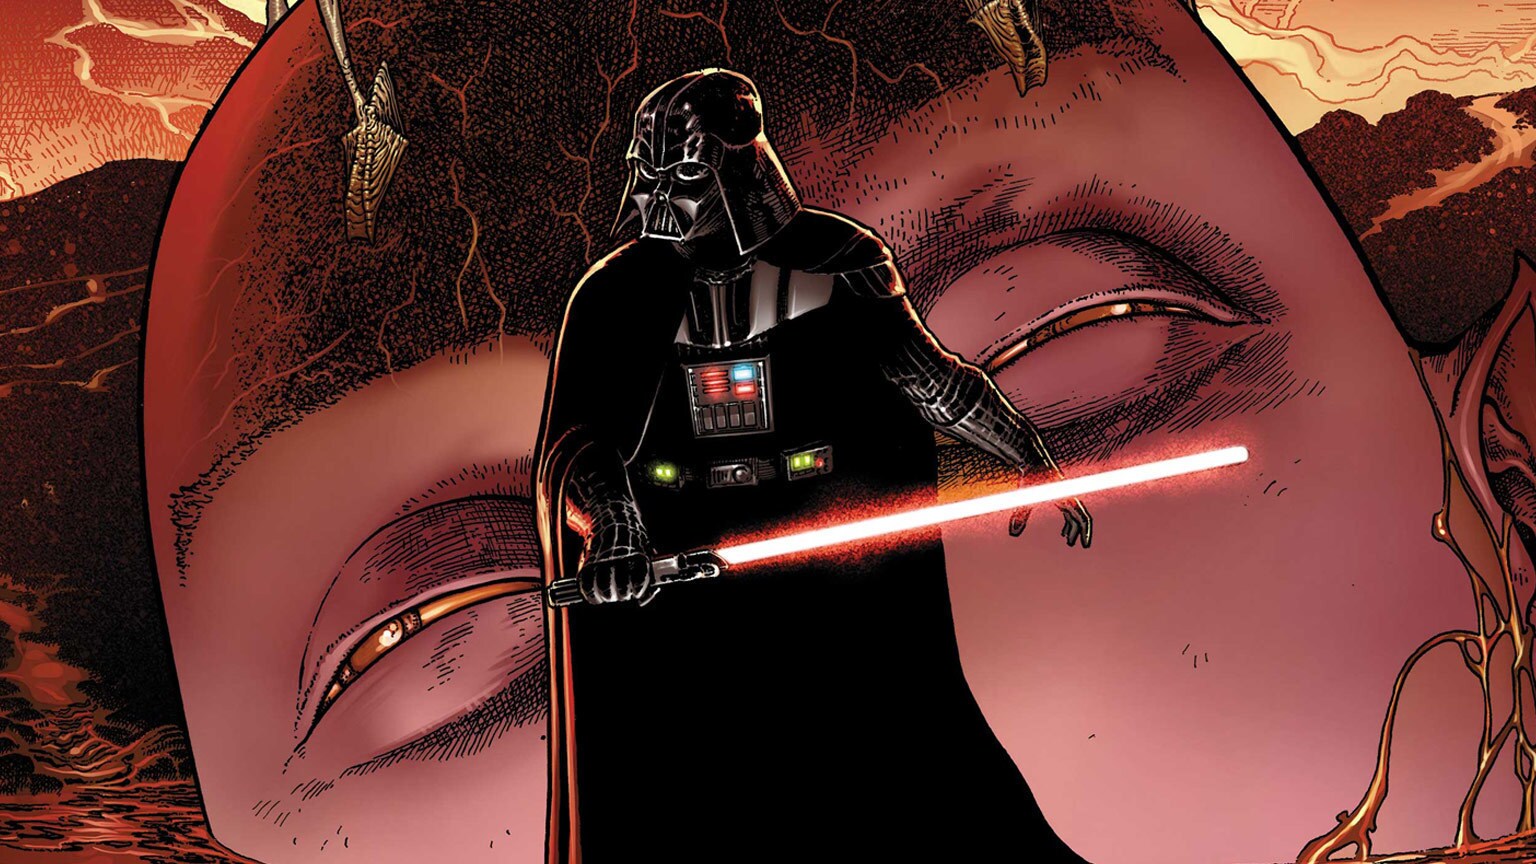 Vader Faces an Unknown Foe in Marvel's Darth Vader #8 - Exclusive Preview